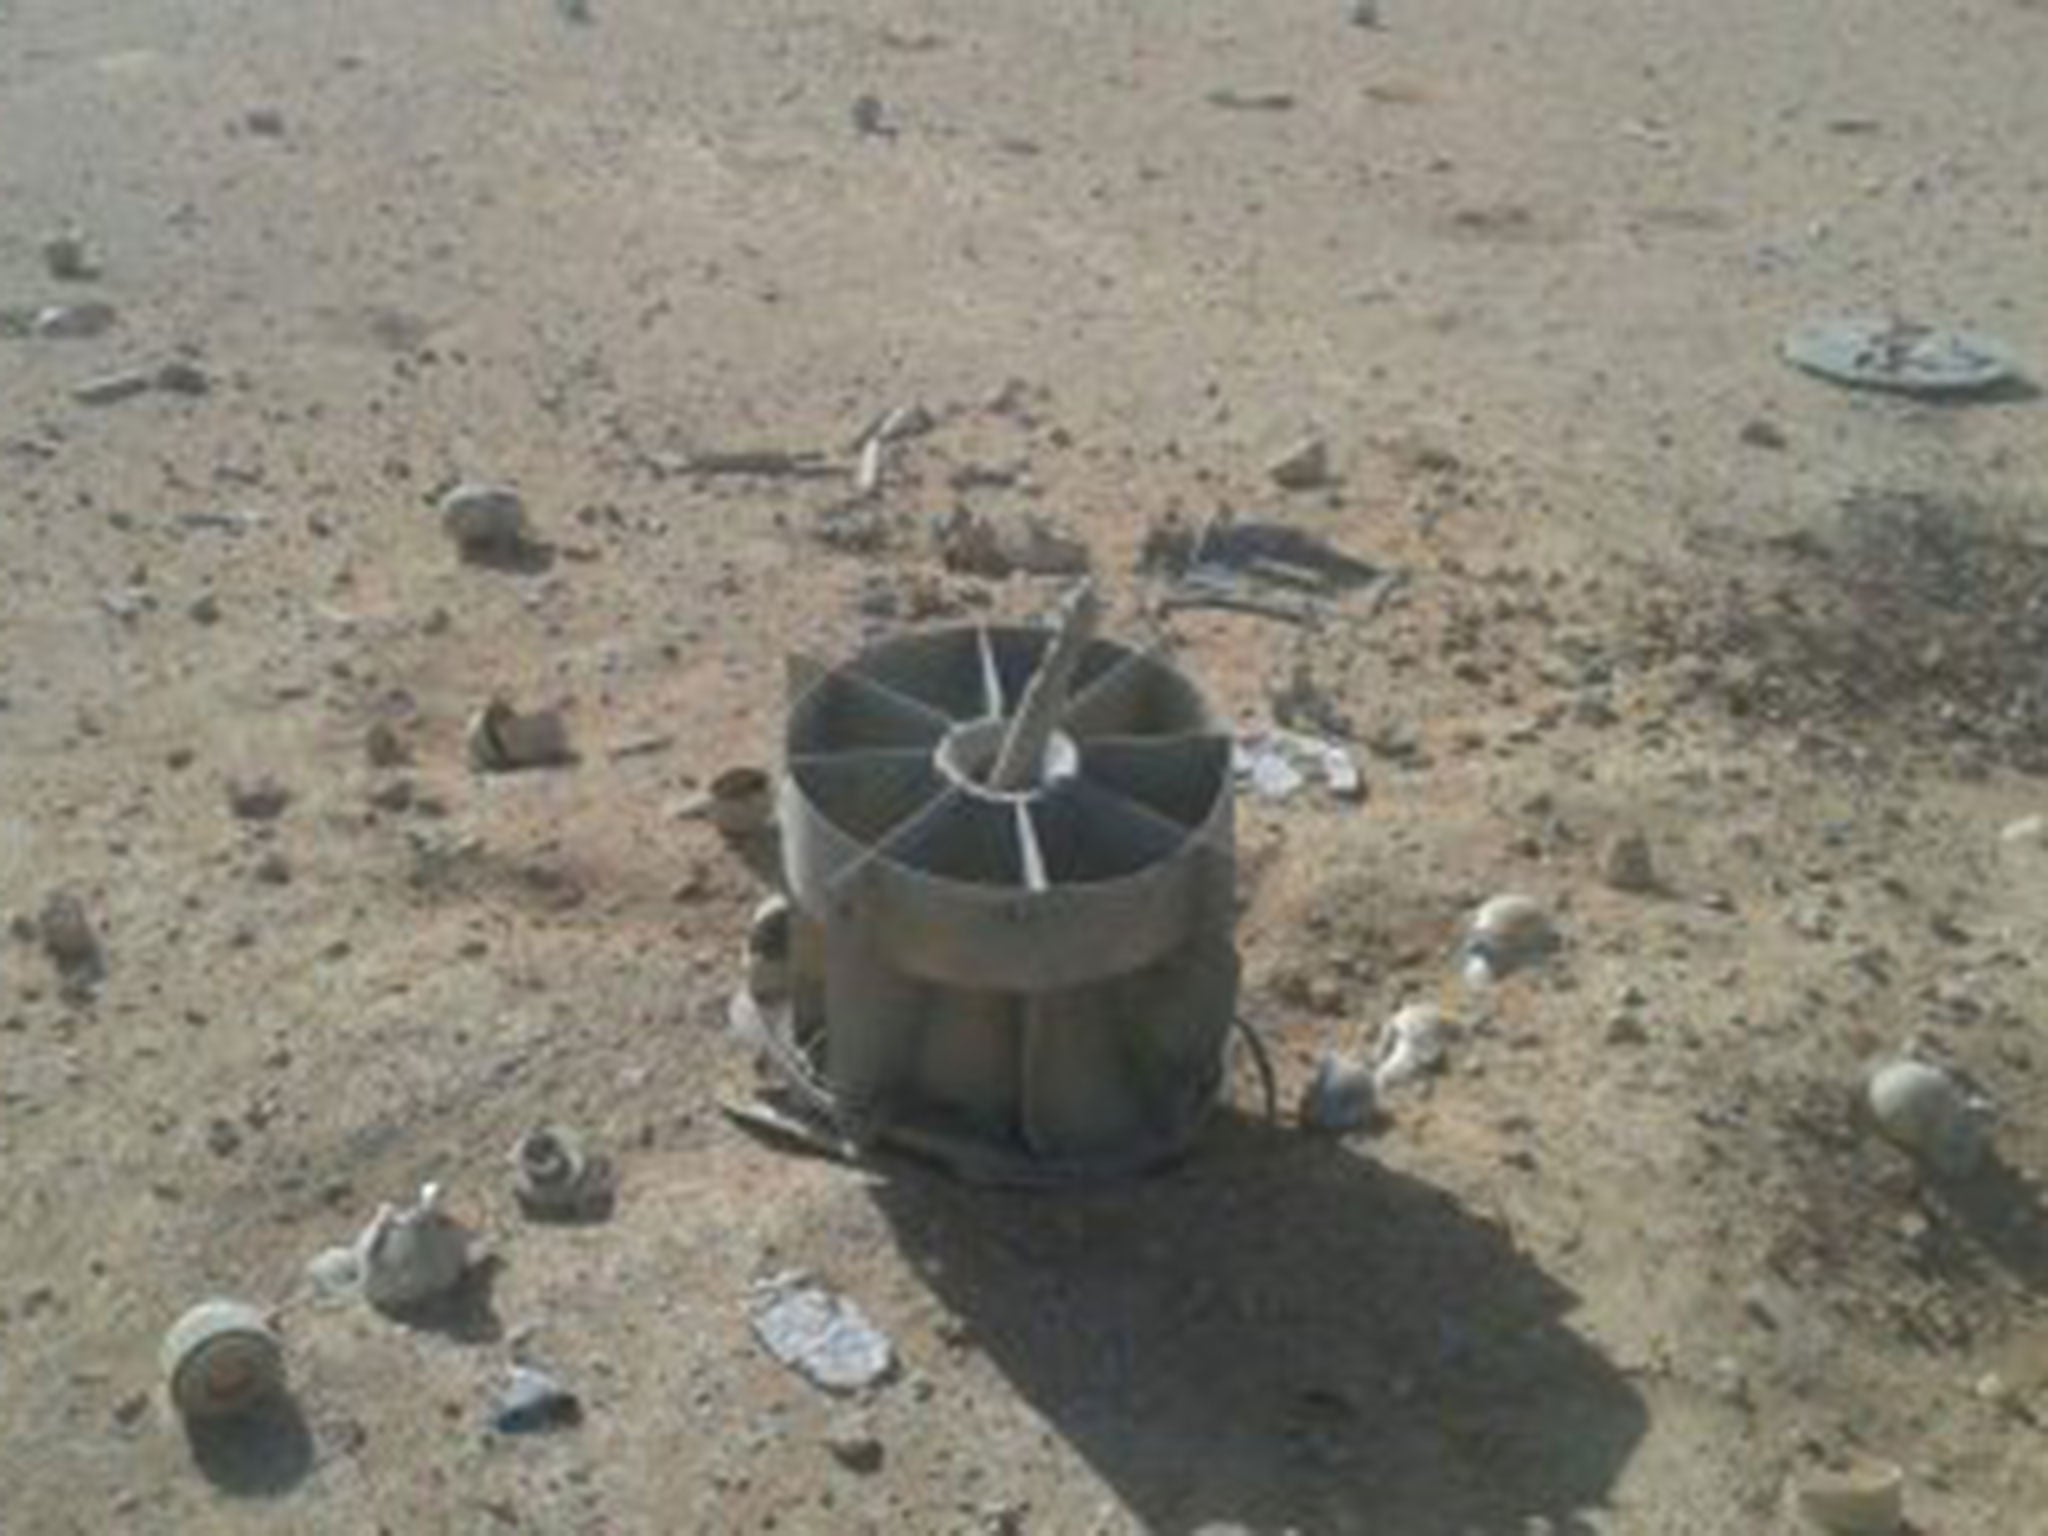 An image showing what appears to be the tail of a RBK-500 cluster munition following Russian air strikes on US-backed rebels in al-Tanf, Syria, on 16 June 2016